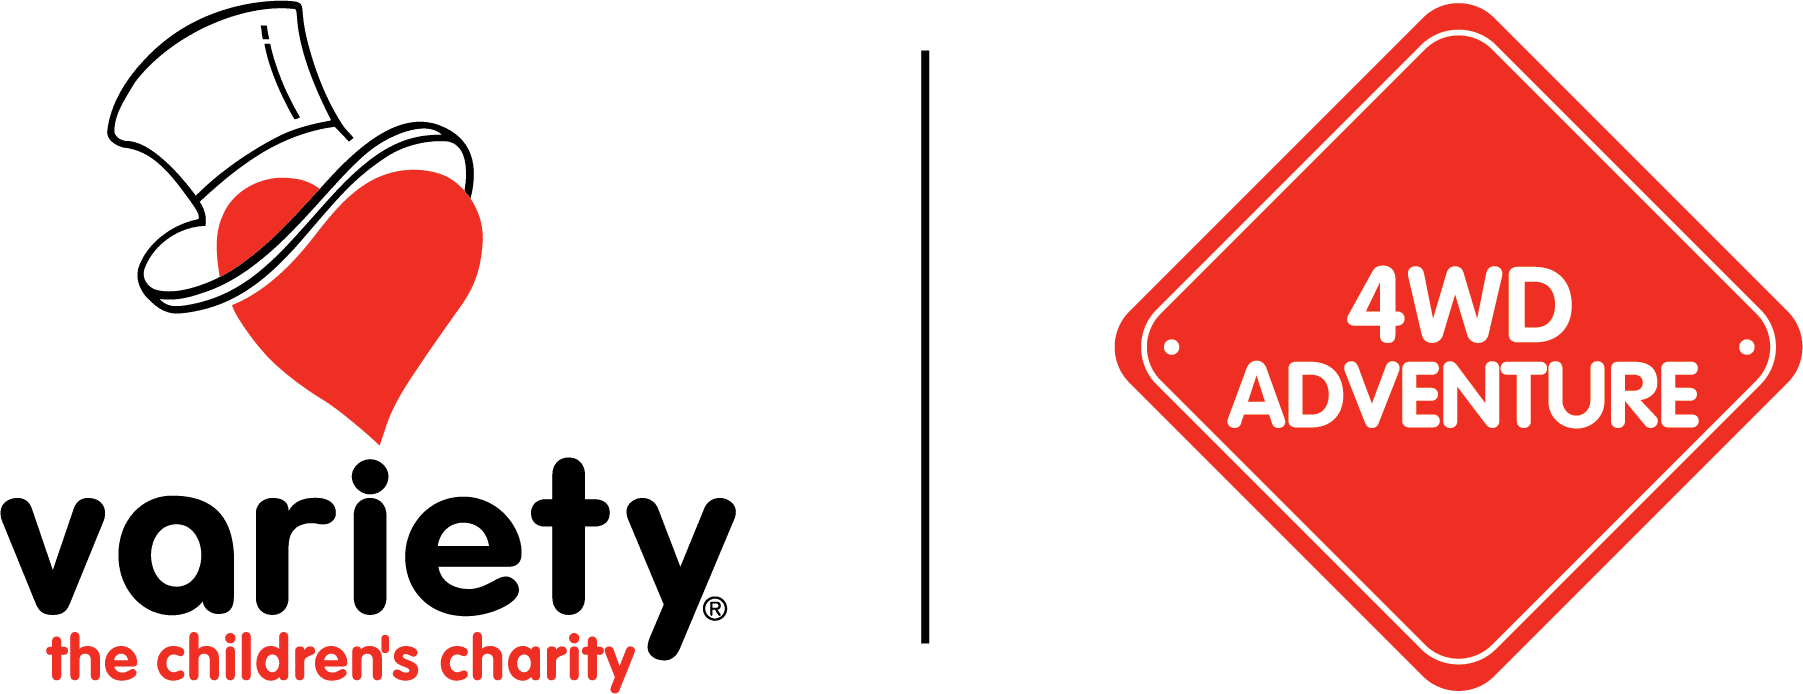 Variety 4WD Adventure - Colour Logo (.PNG)